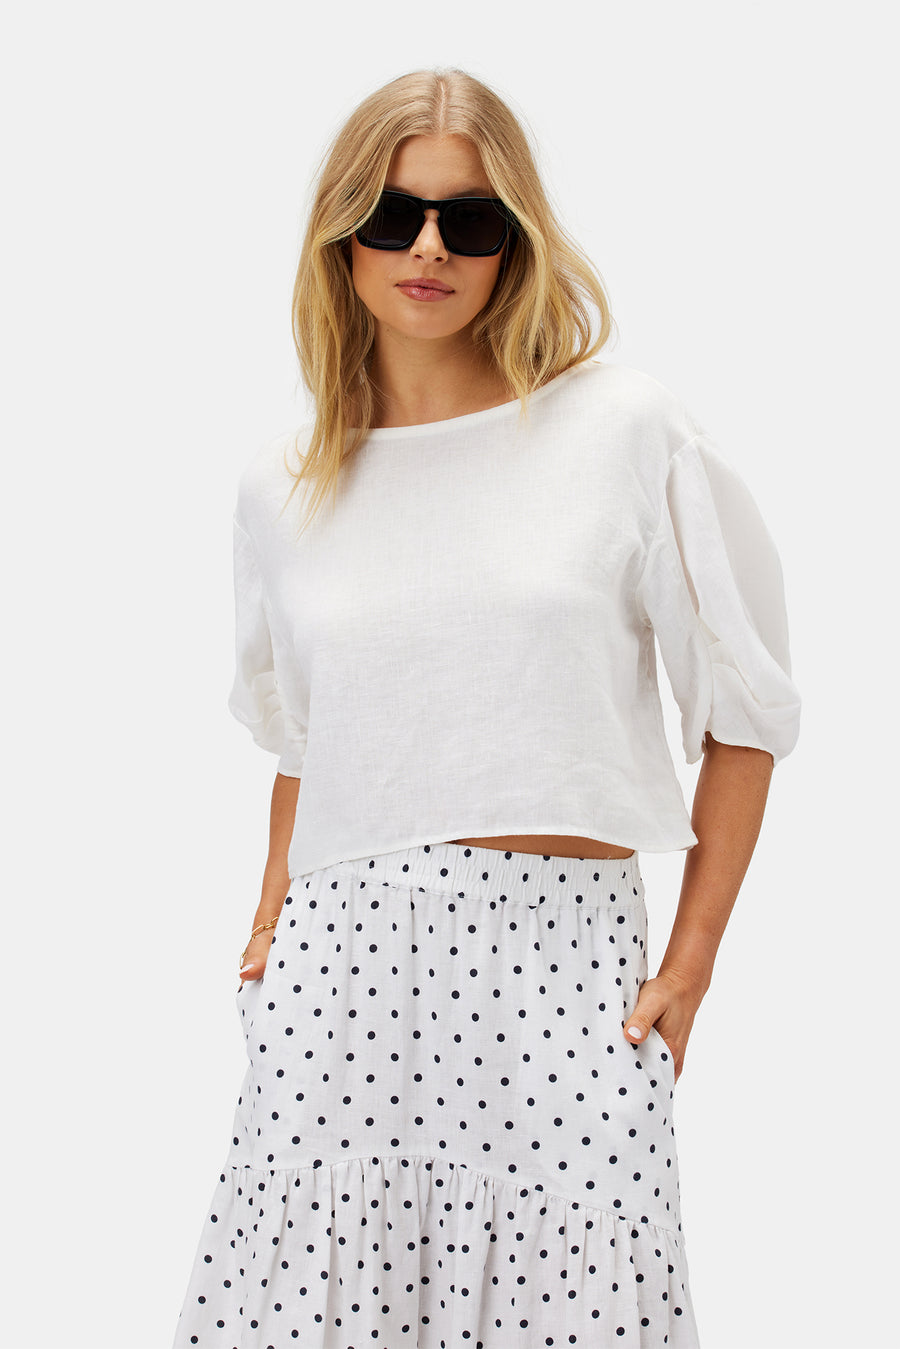 Lilly Pilly Leia Organic Linen Top - White